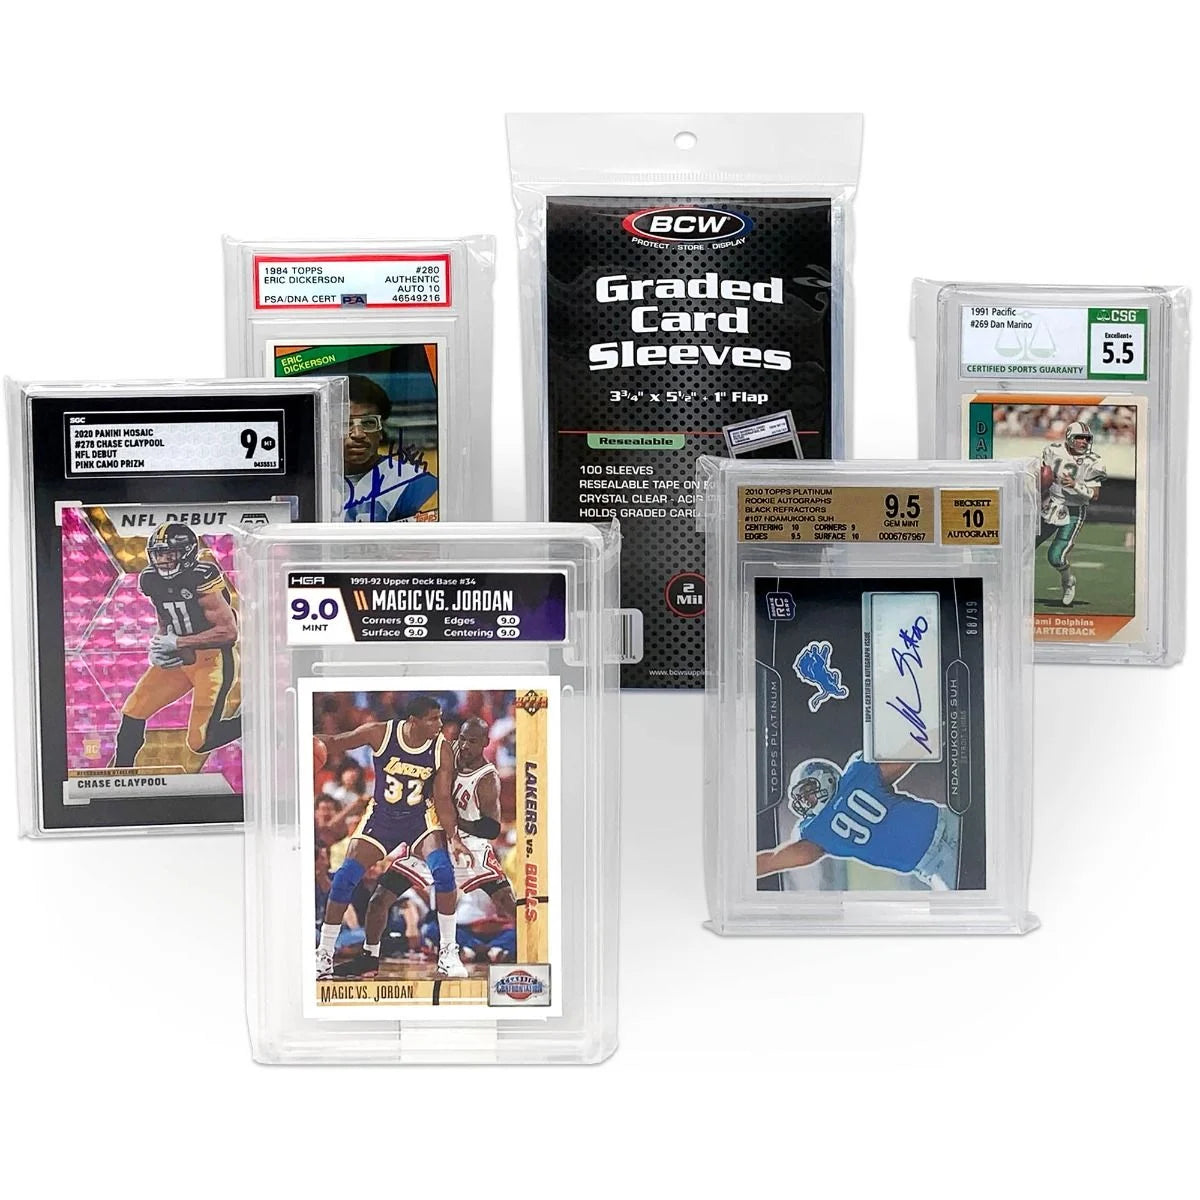 100 Pack Resealable Graded Card Sleeves - Multiple graded cards sleeved from various companies (PSA, SGC, BGS, HGA, and CGC)